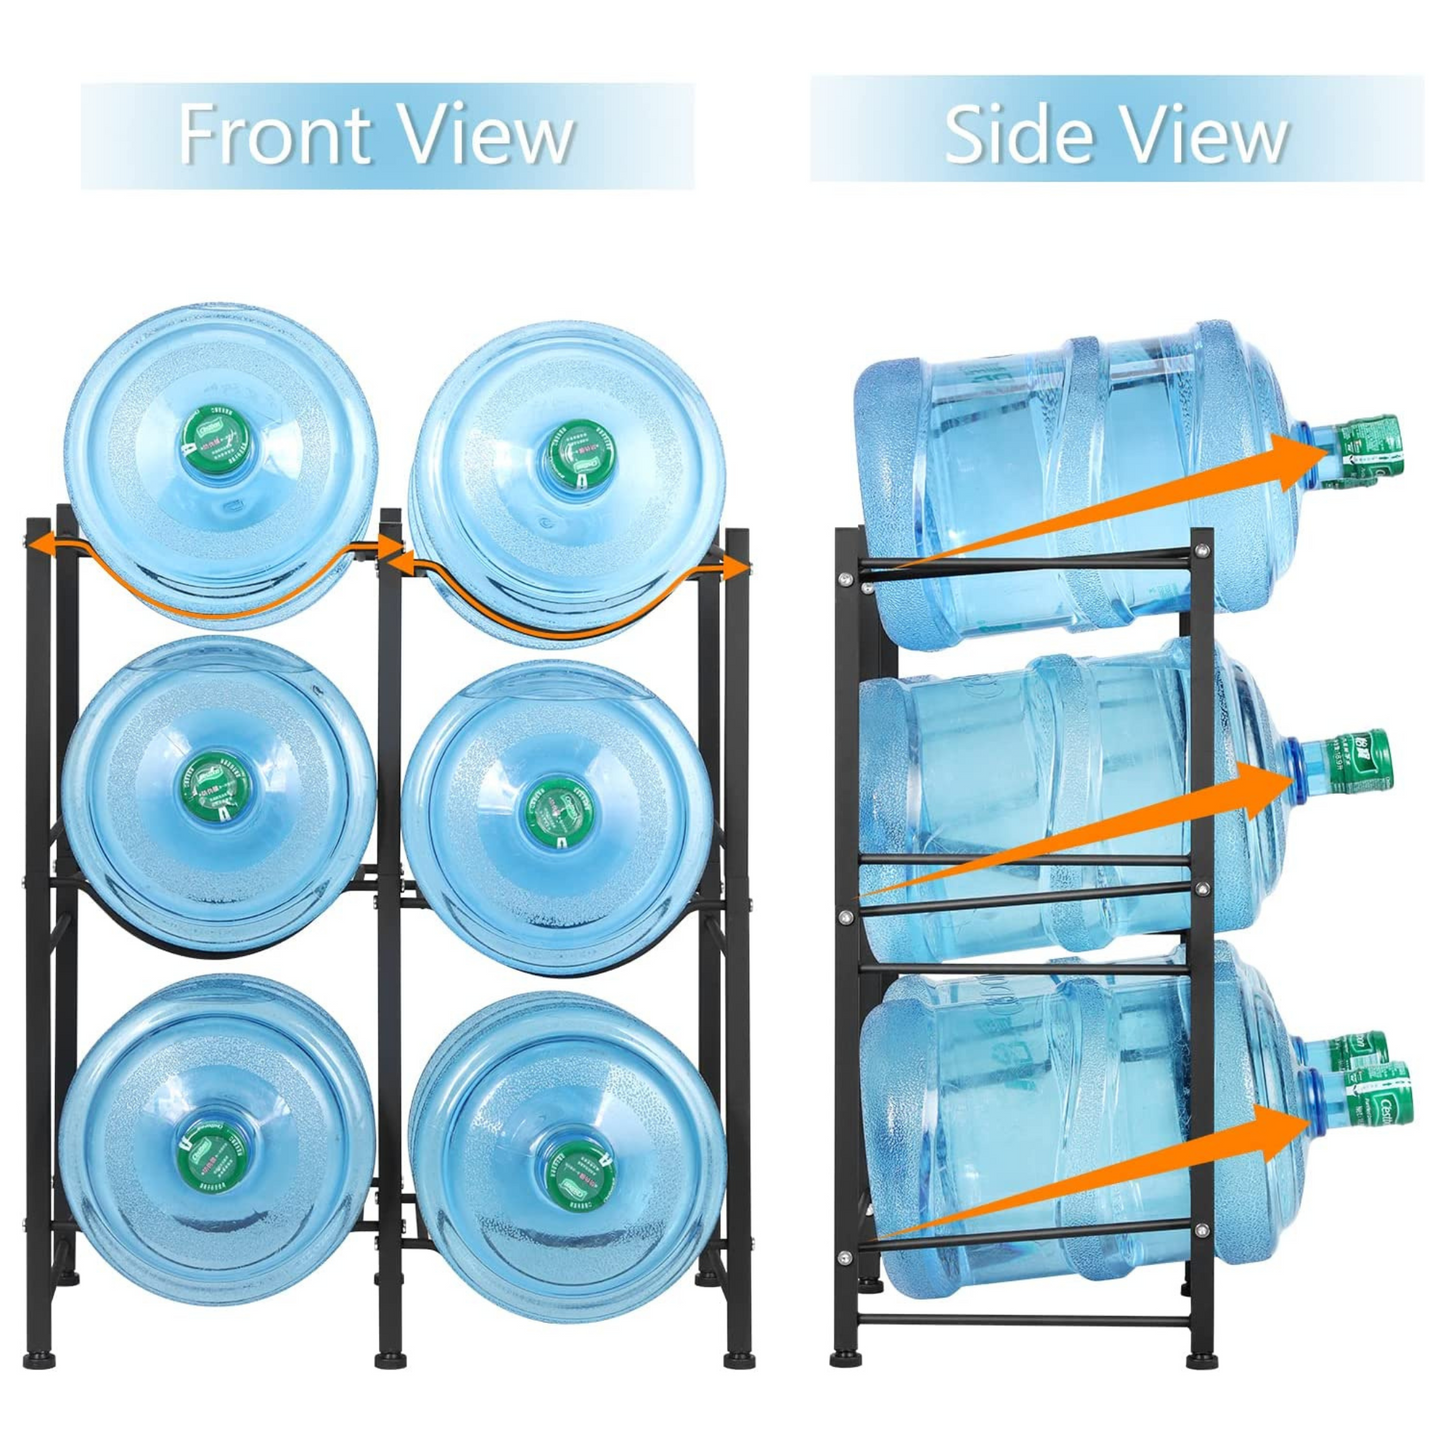 Designed to hold up to 6 water gallon jugs at one time, this 3-tier double 5-gallon water bottle rack is made of heavy-duty steel and measures 24.8” x 12.9” x 29.1” (LWH). Its adjustable screw feet provide stability and prevent floor damage, making it a practical and safe addition to any room.